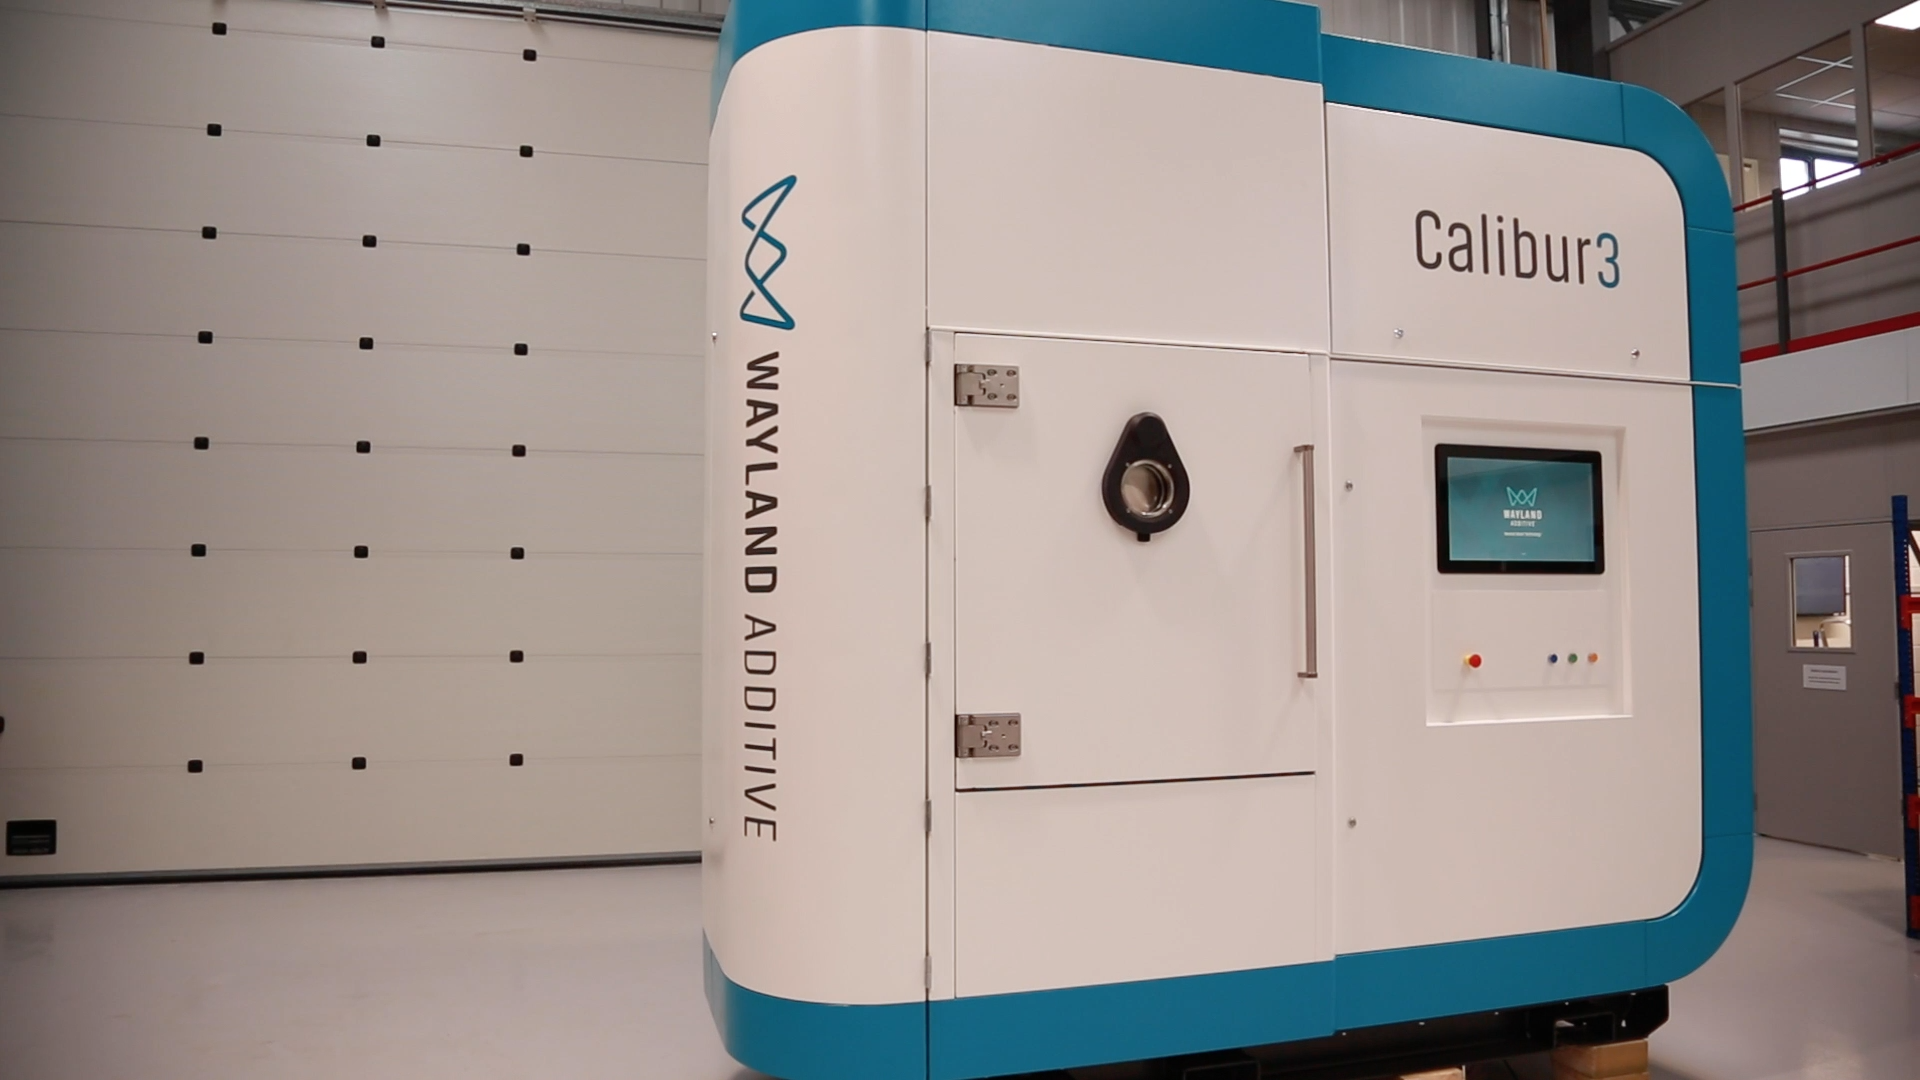 Calibur3 AM machine by Wayland Additive, with an enclosure by Amcanu.